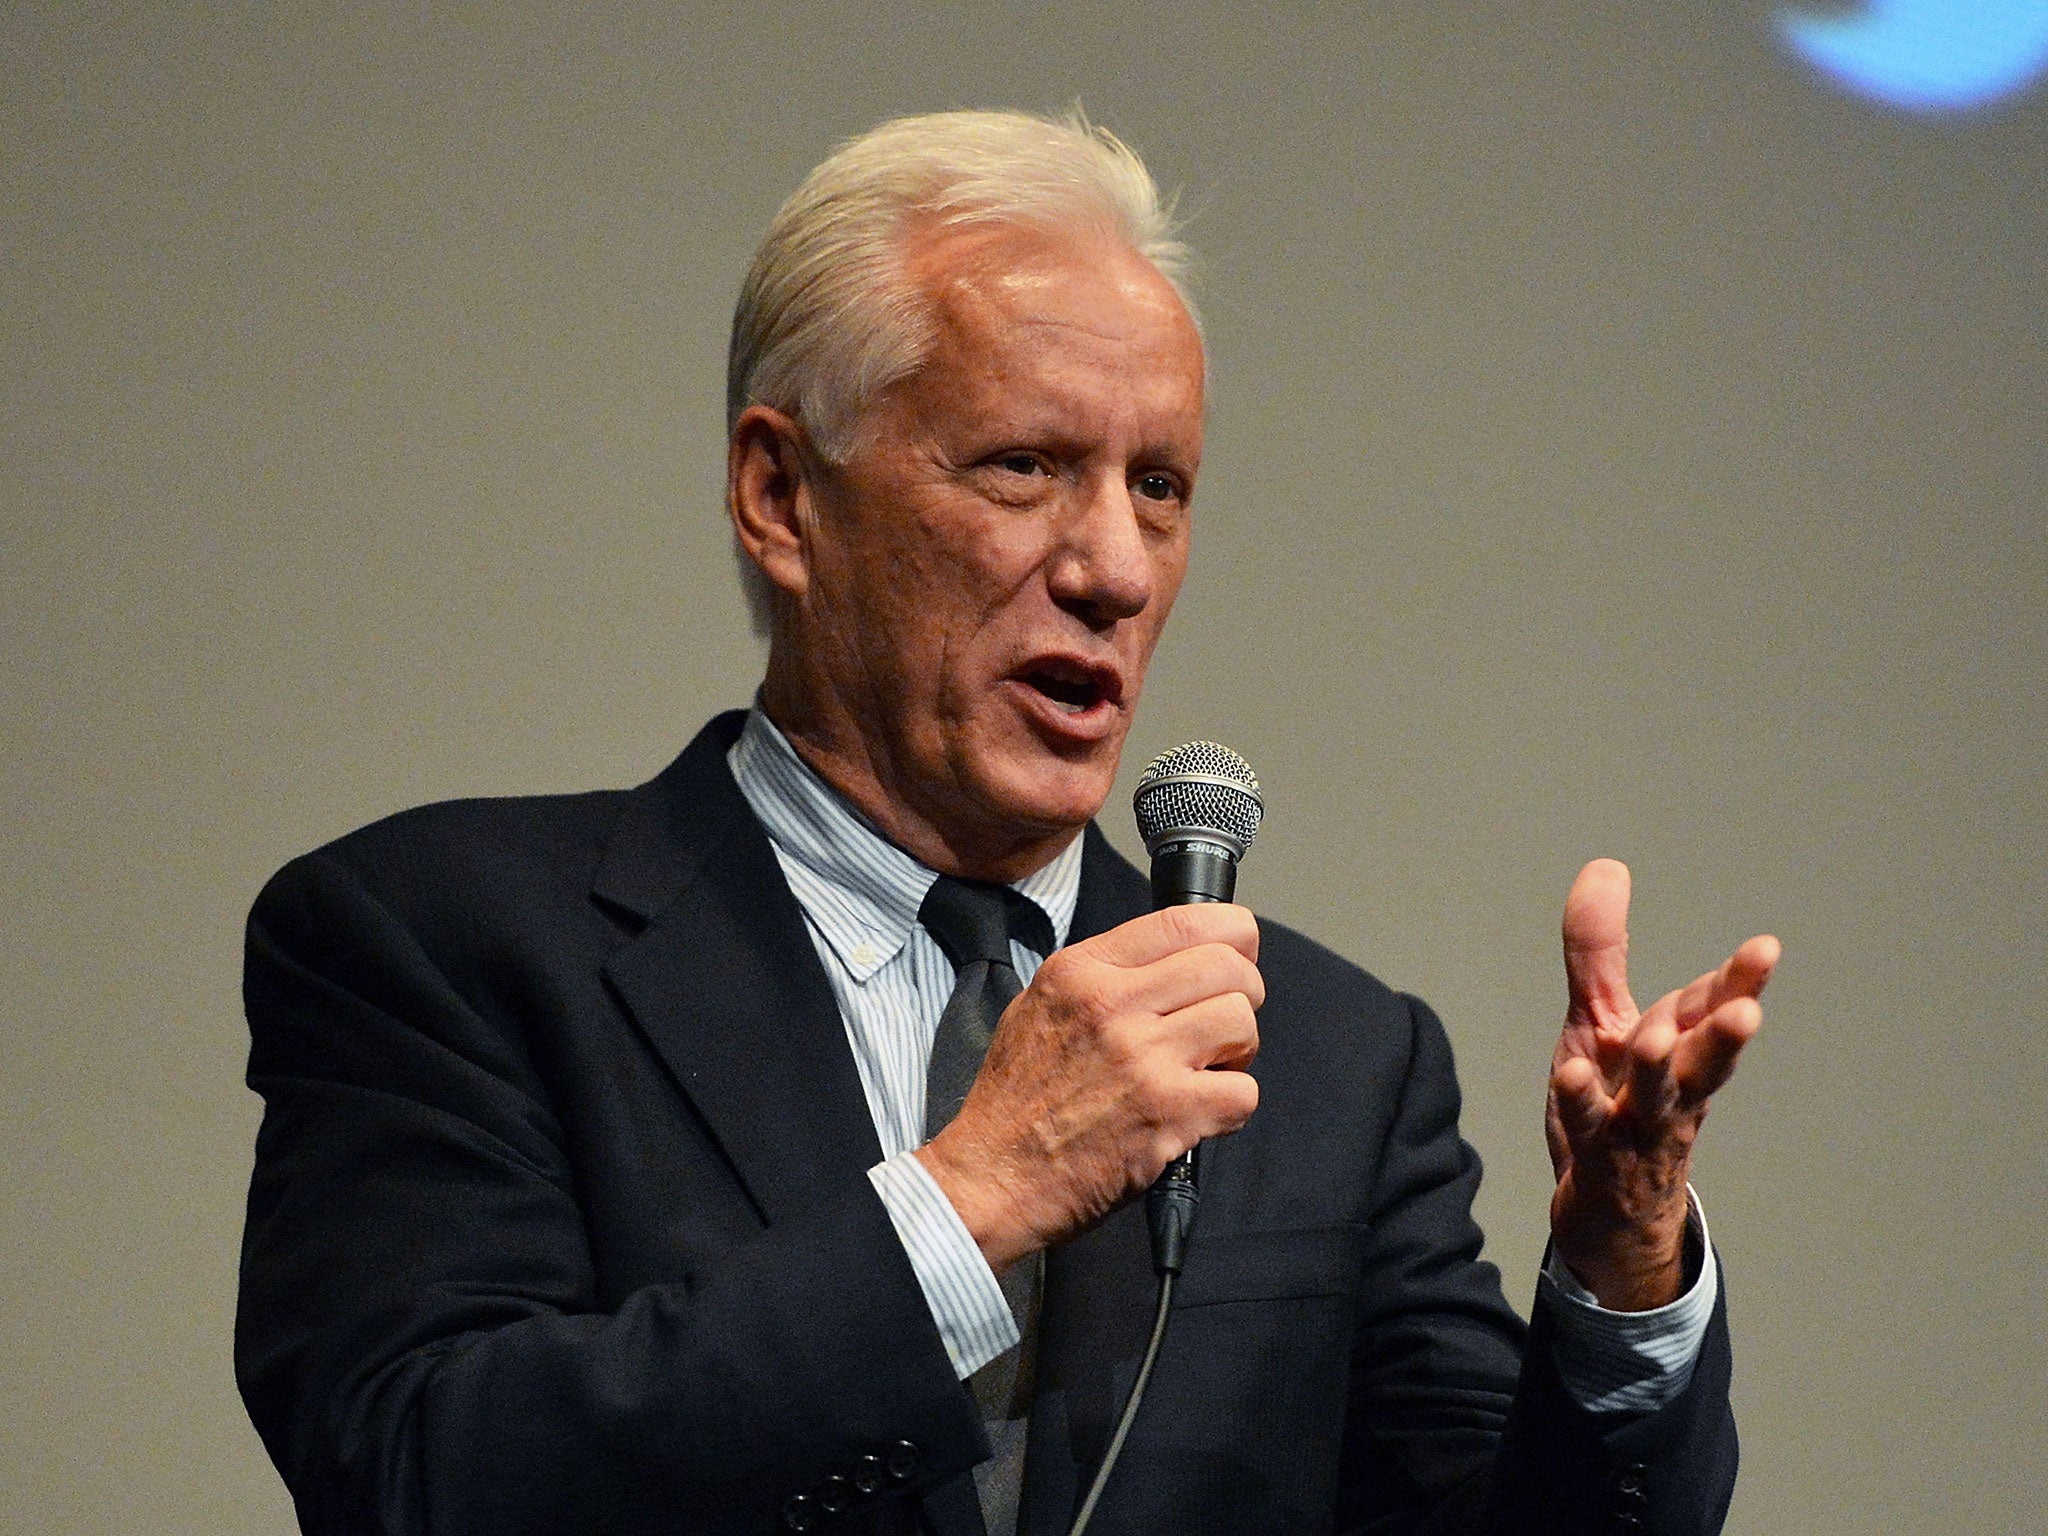 File: James Woods attends the 52nd New York Film Festival at Walter Reade Theater on September 27, 2014